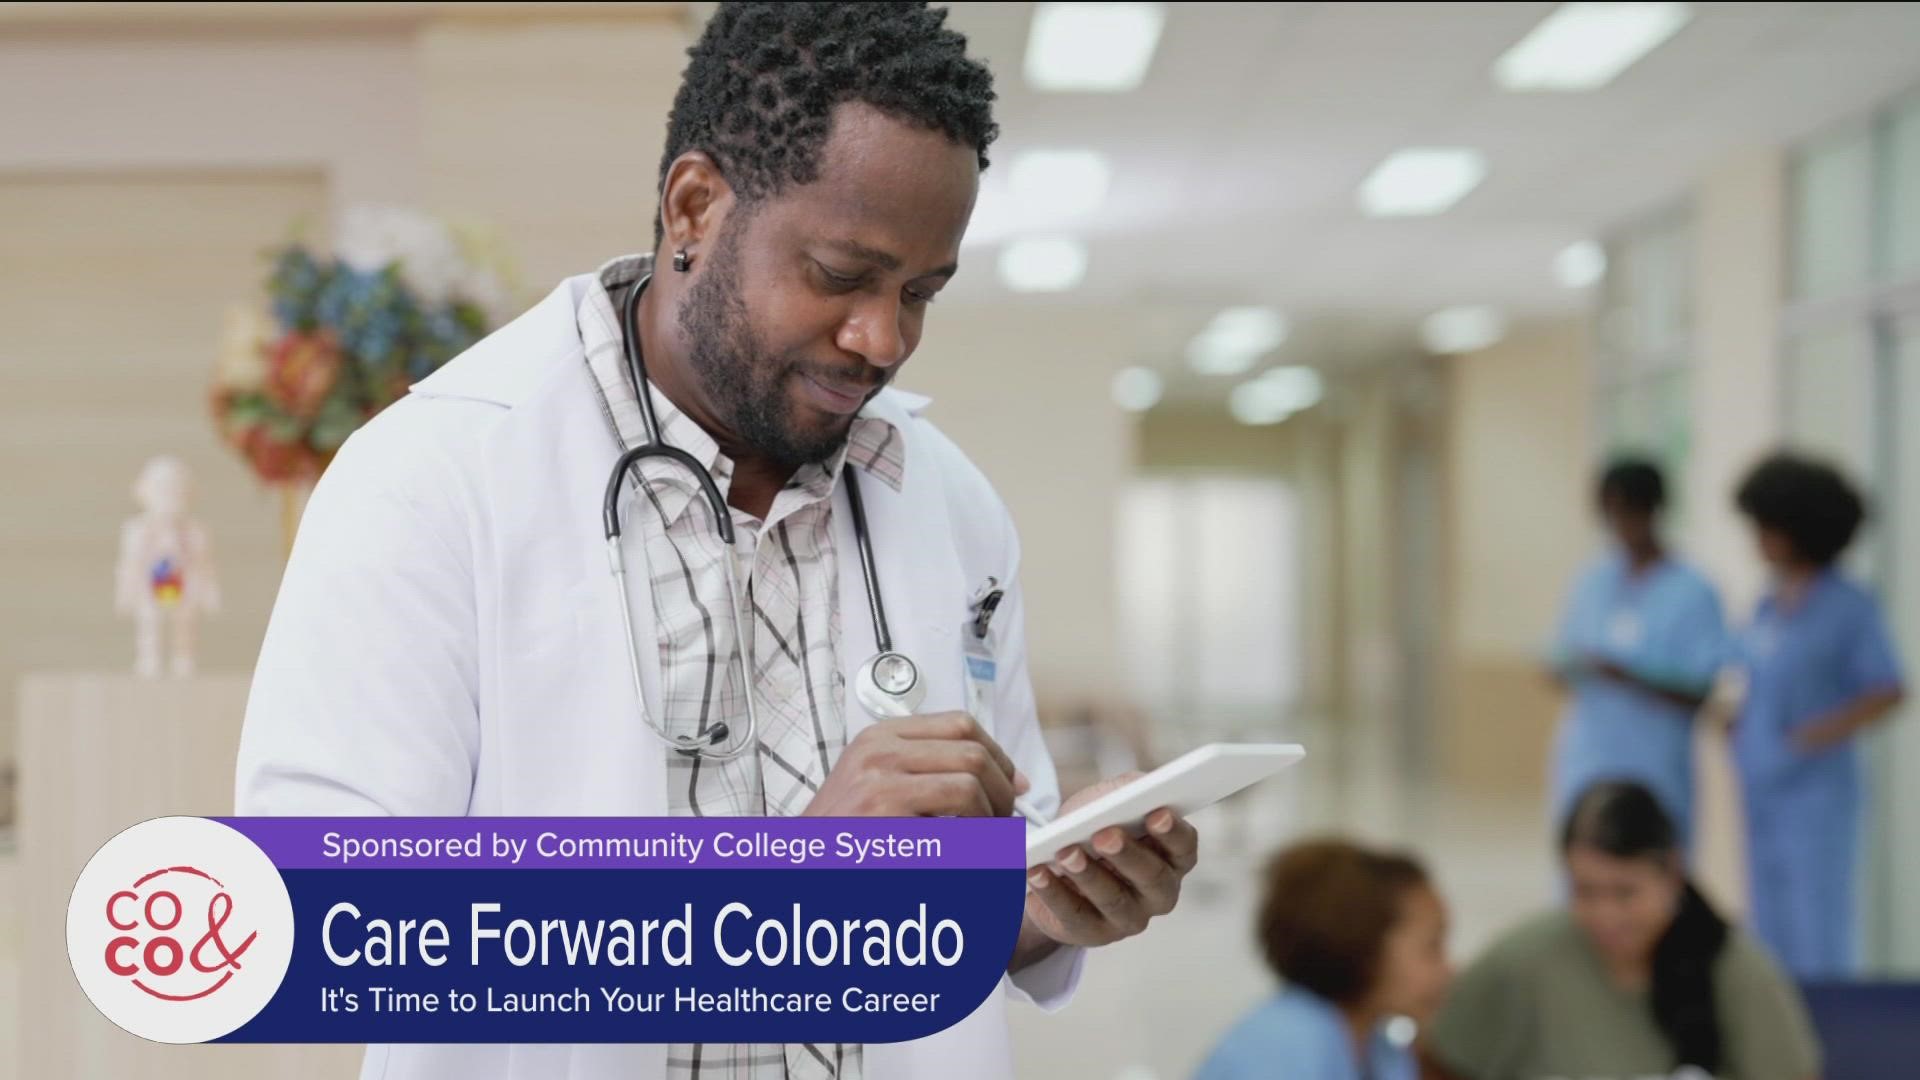 Launch your health care career with Care Forward  Colorado. Get short-term training at a community college near you. Head online to CCCS.edu/Care-Forward-Colorado.